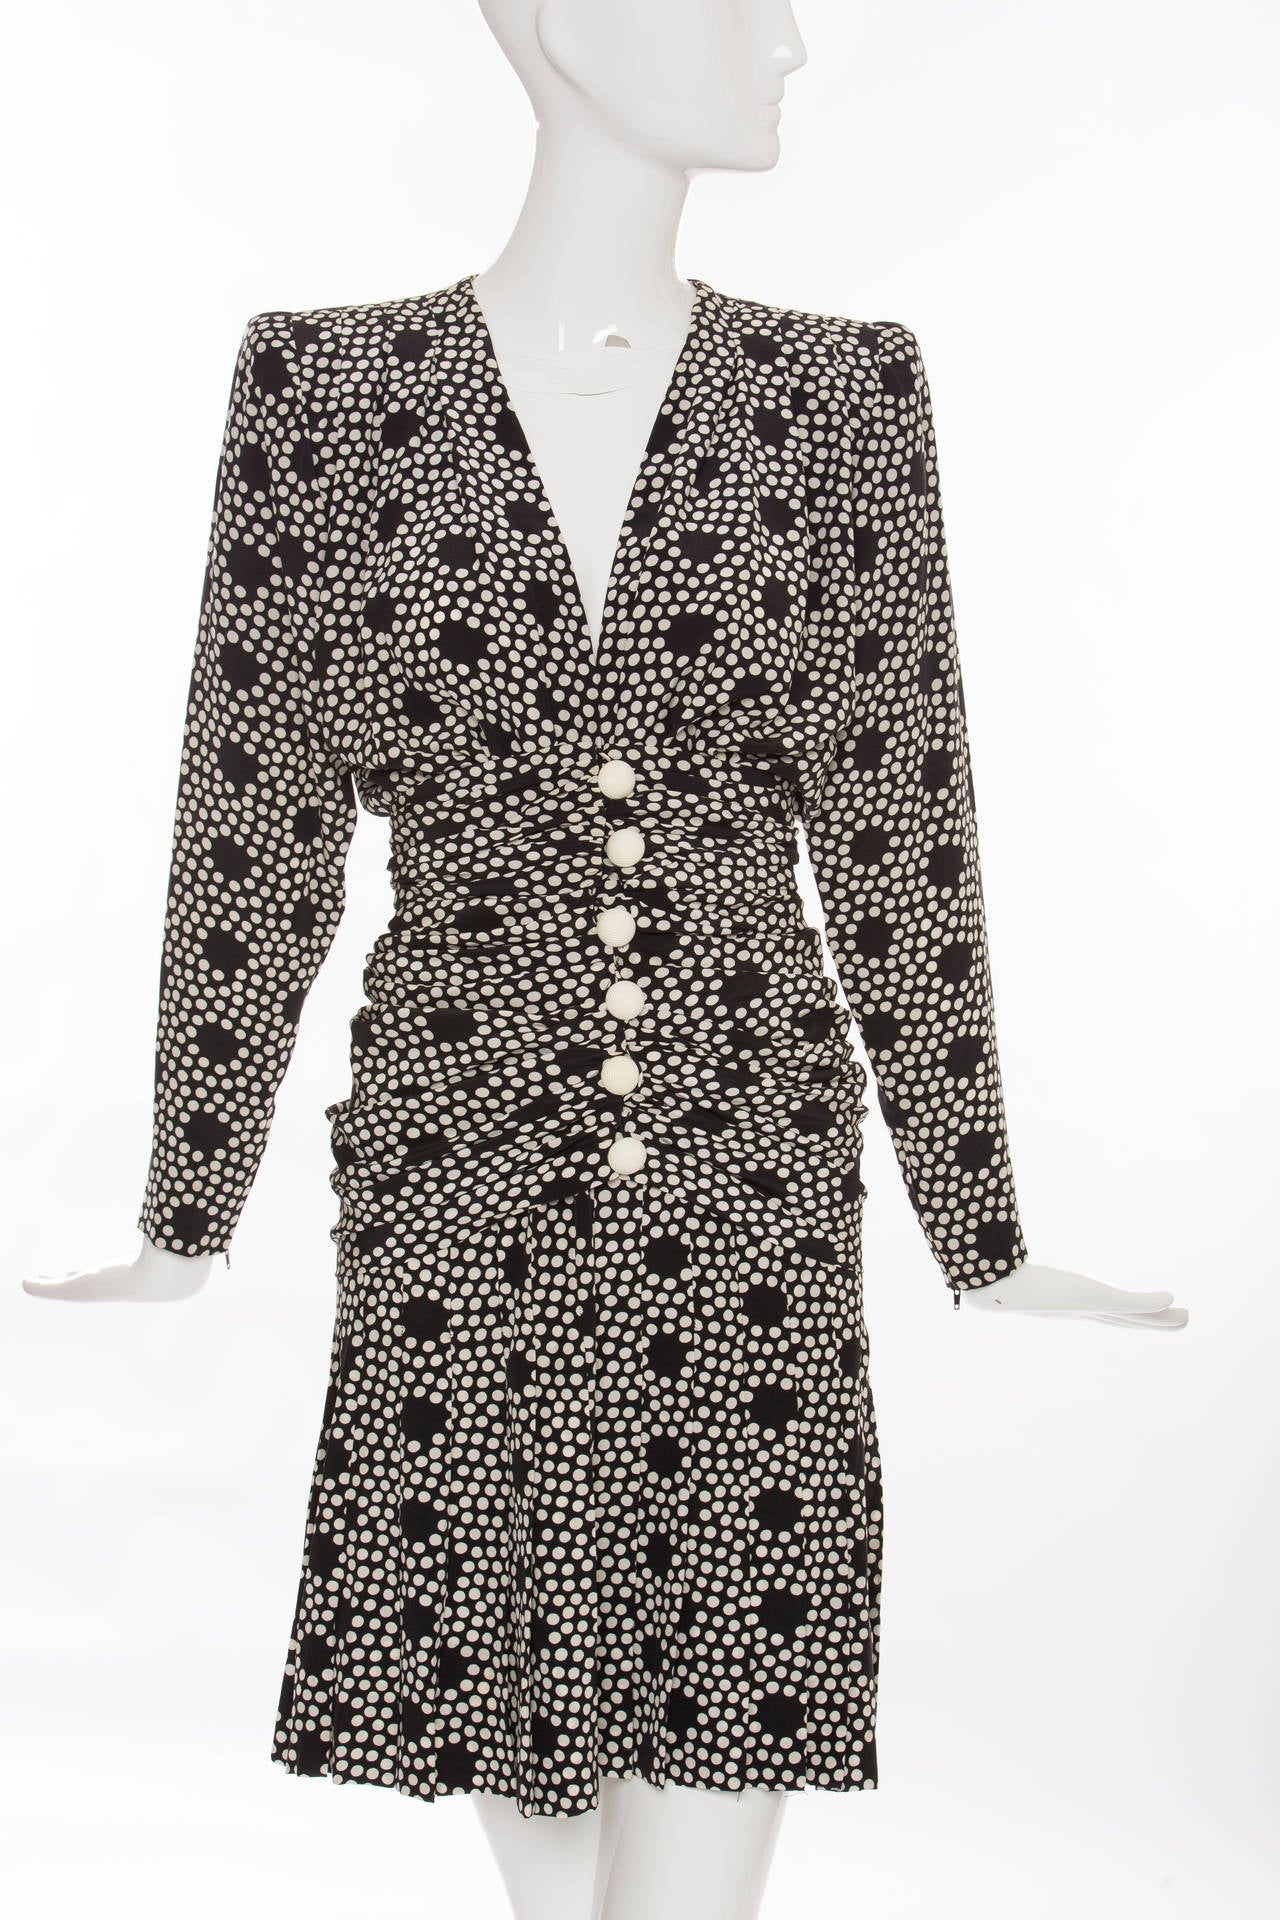 Givenchy Haute Couture, circa 1980s skirt suit. The top has several hidden hook and eye and snap closures, cream button front with self belt. The drop pleated skirt has side zip and hook and eye closure.

Top: Bust 39, Waist 22, Waist 29, Length